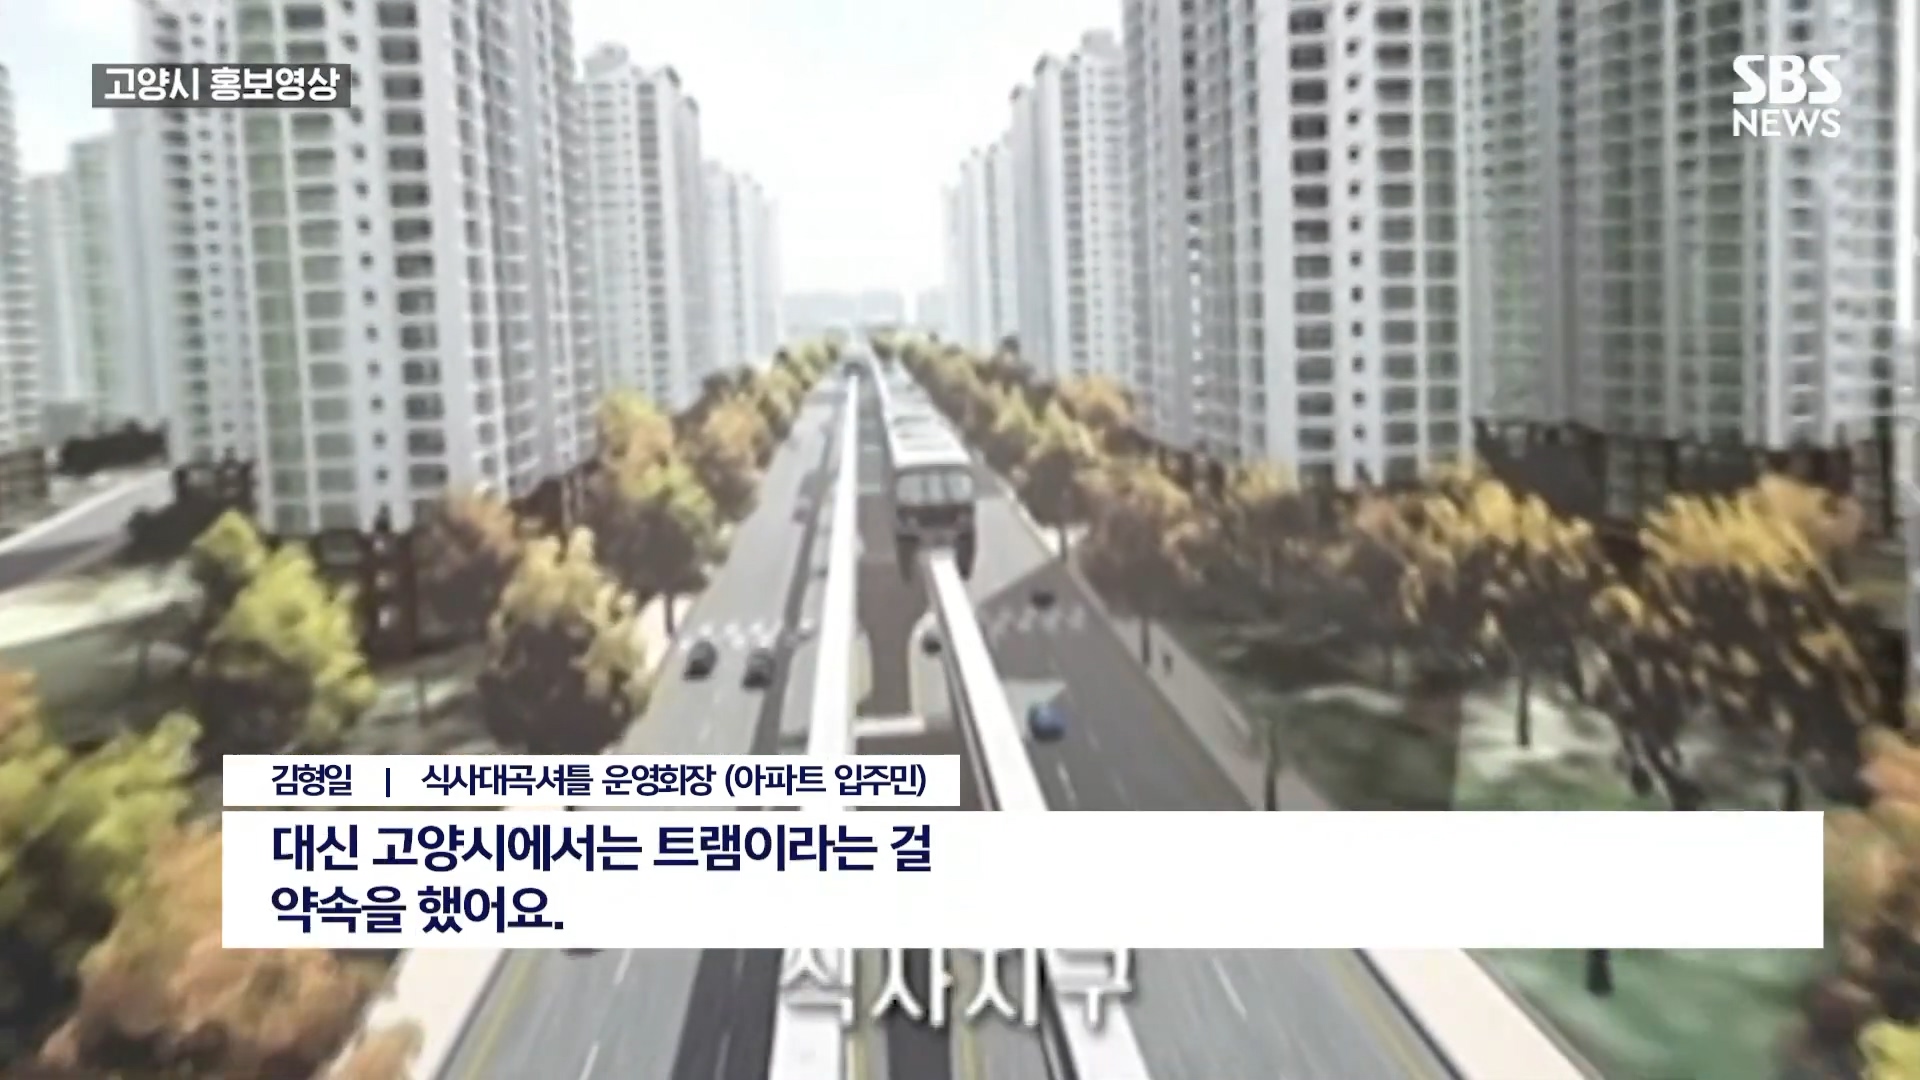 Pros and cons of shuttle buses exclusively for apartment complexes